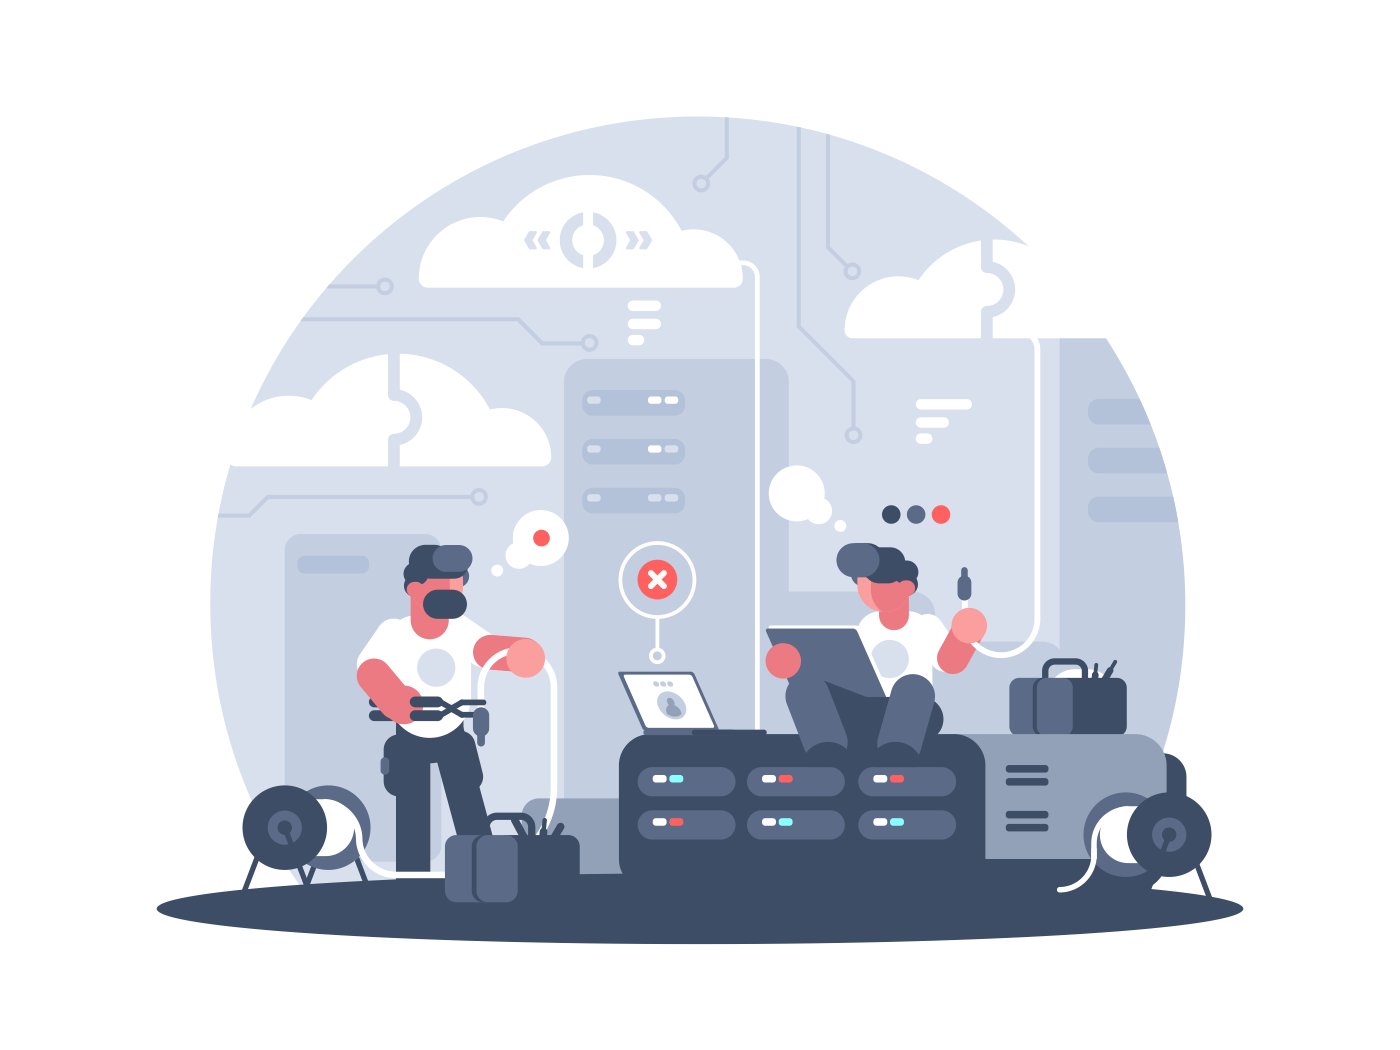 Engineers of service support of communication and connection. Vector illustration